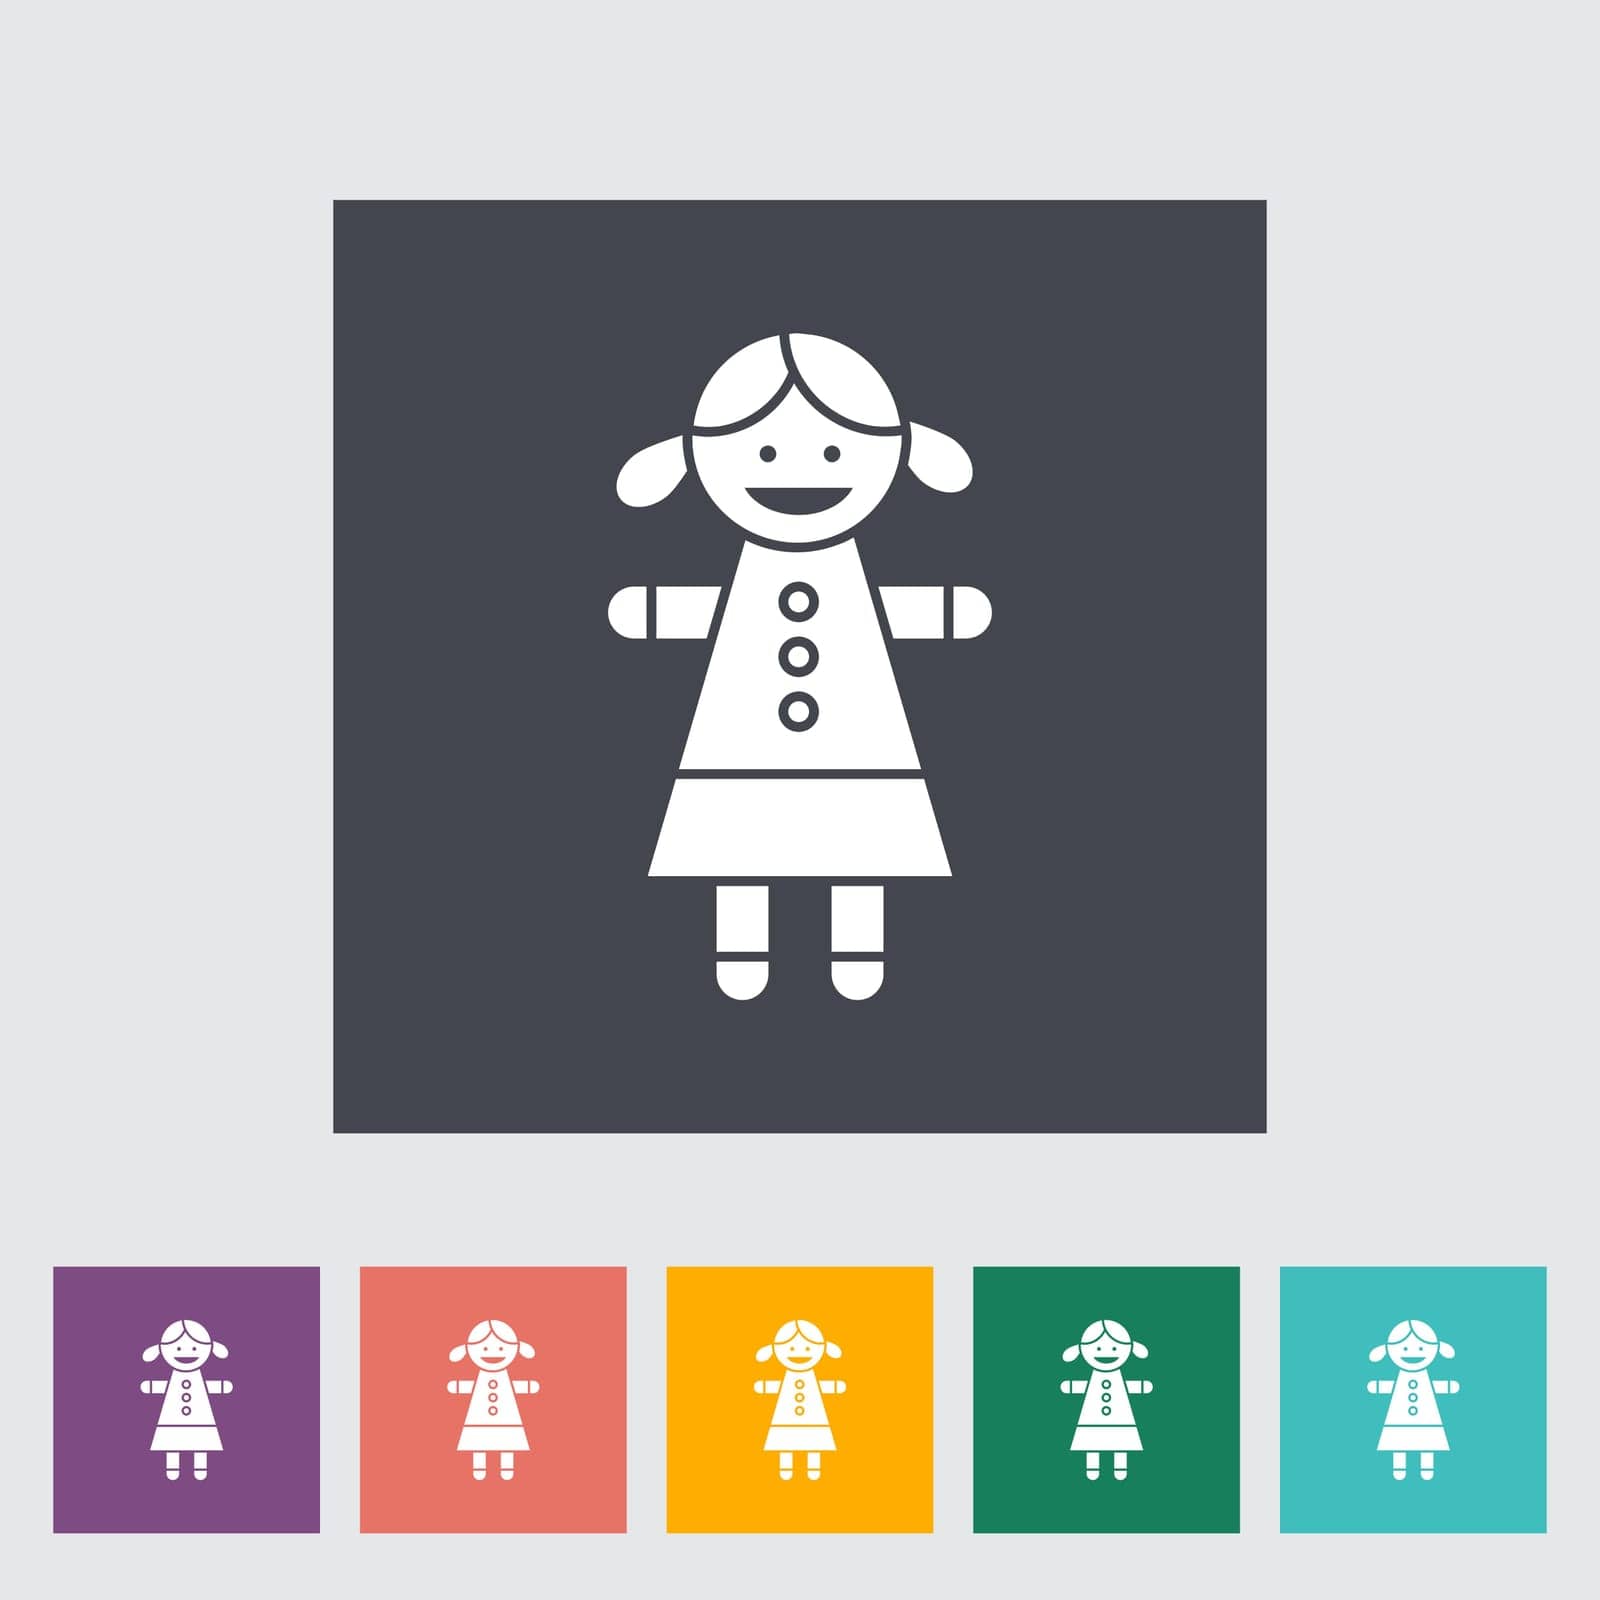 Doll toy icon. Flat vector related icon for web and mobile applications. It can be used as - logo, pictogram, icon, infographic element. Vector Illustration.